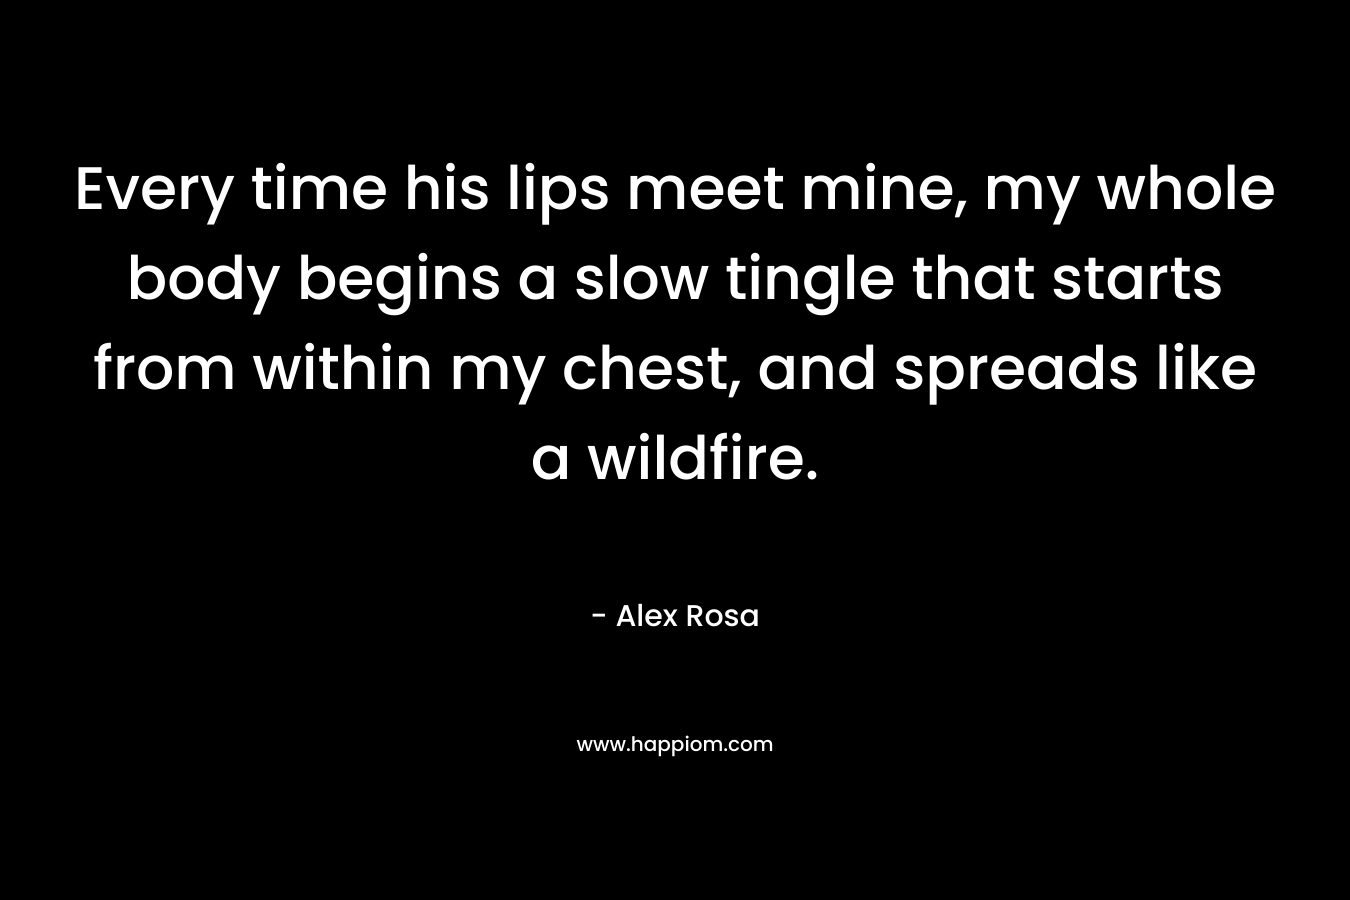 Every time his lips meet mine, my whole body begins a slow tingle that starts from within my chest, and spreads like a wildfire. – Alex Rosa